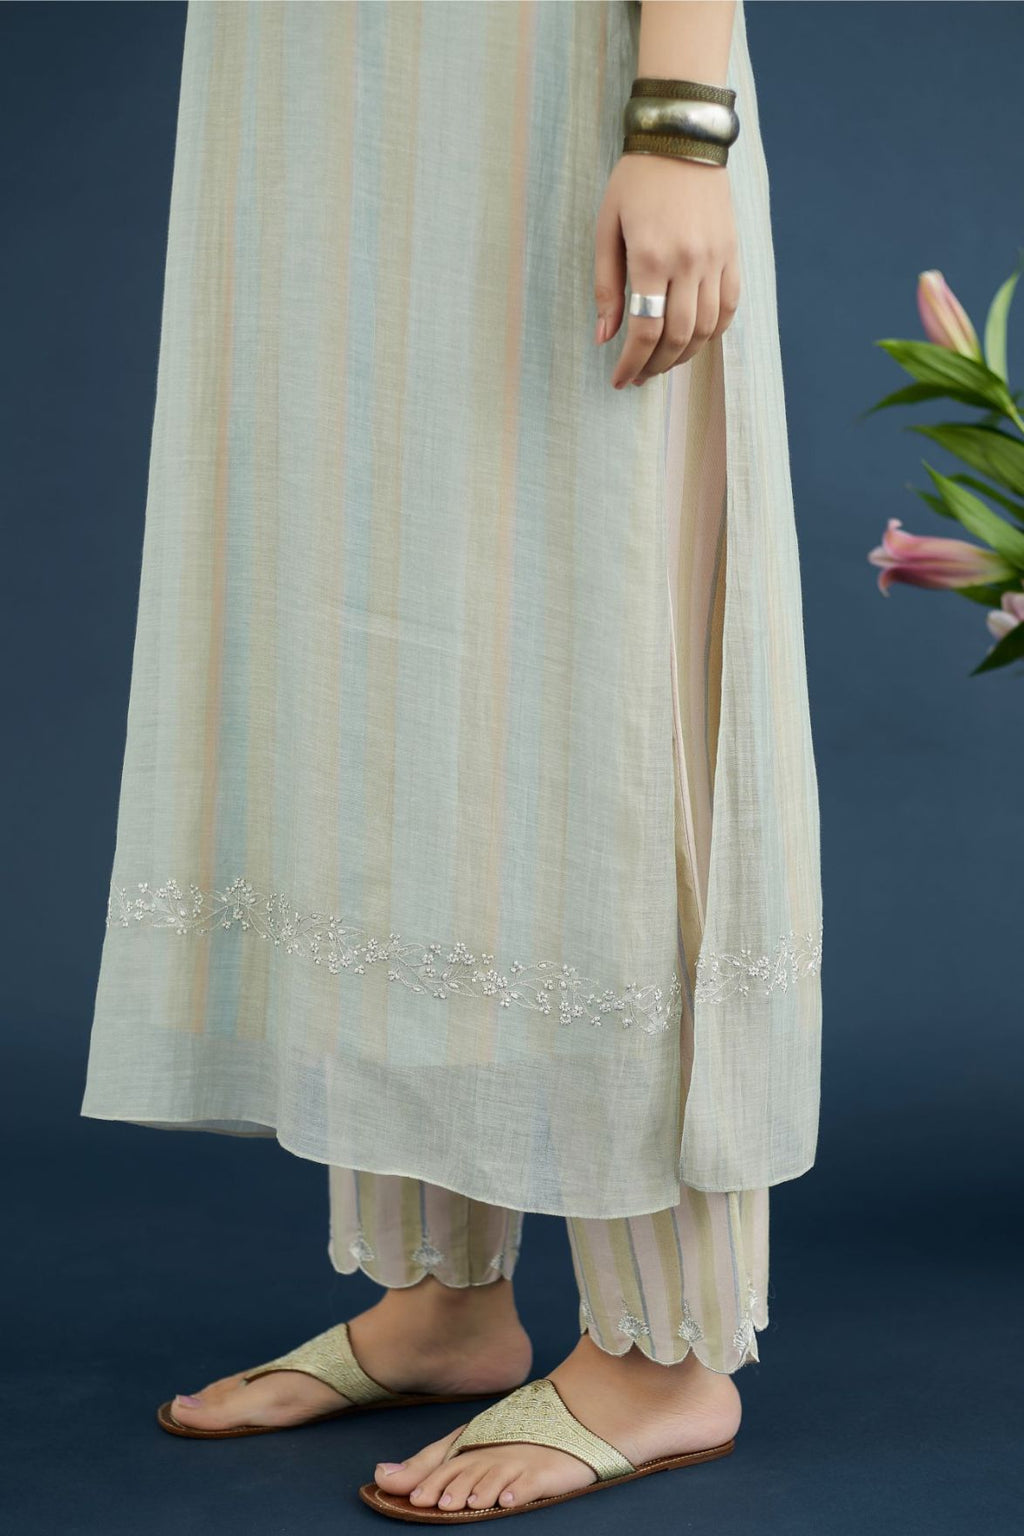 Sea green embroidered double layered cotton chanderi kurta set with hand block printed cotton slip inside